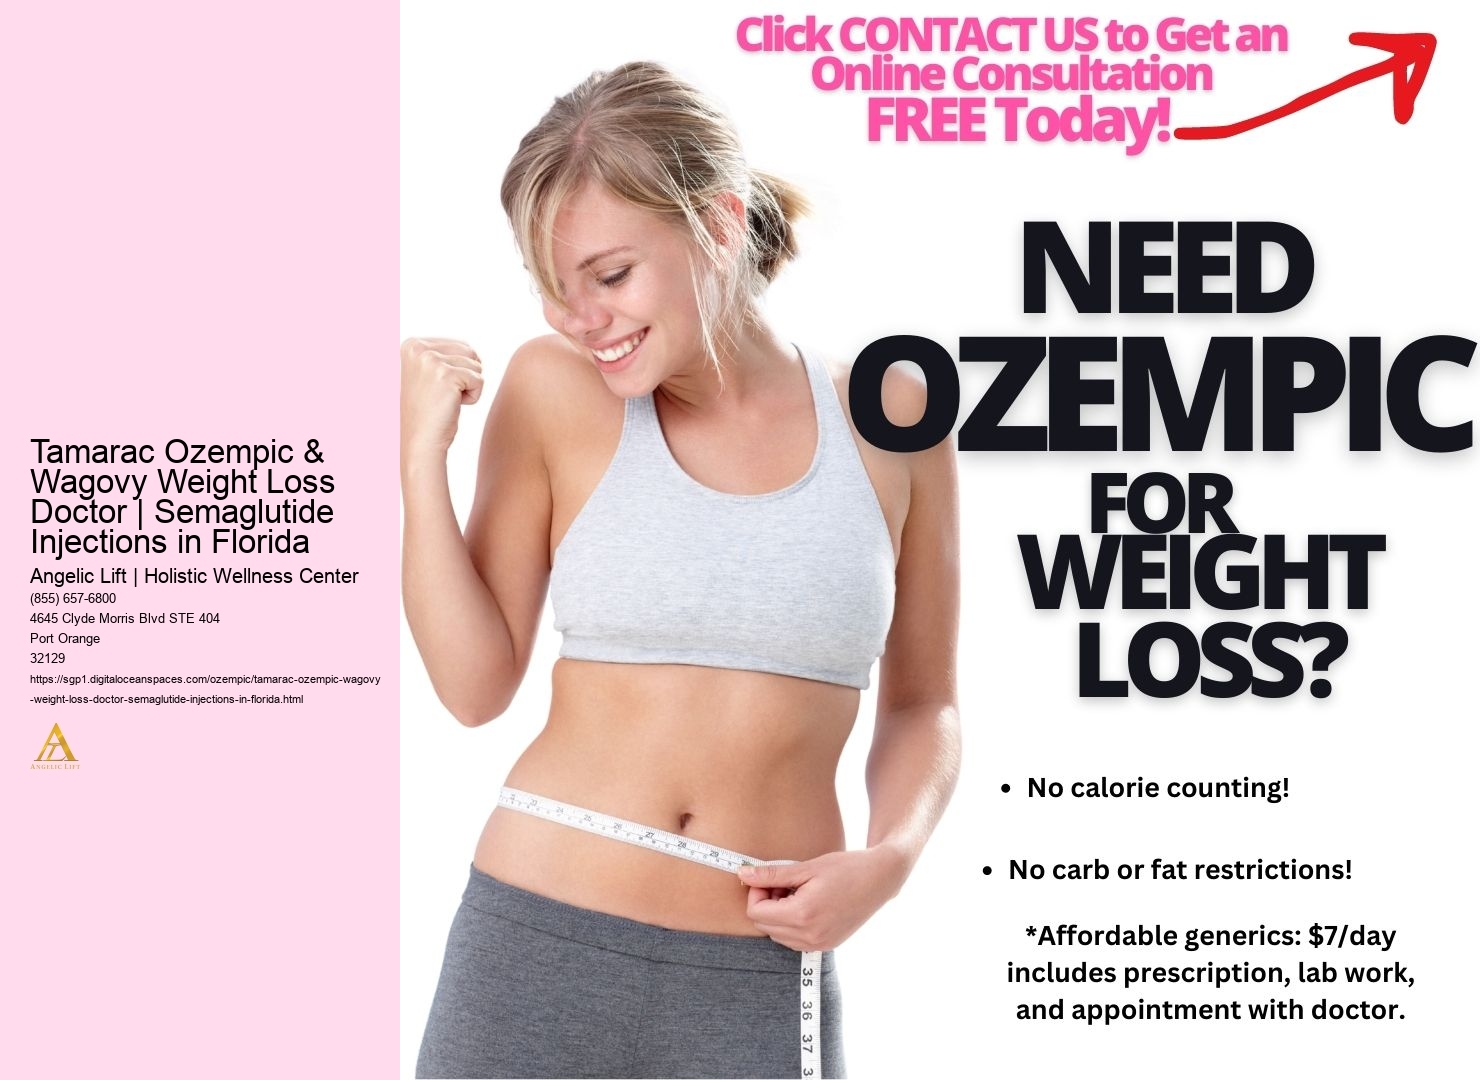 Tamarac Ozempic & Wagovy Weight Loss Doctor | Semaglutide Injections in Florida